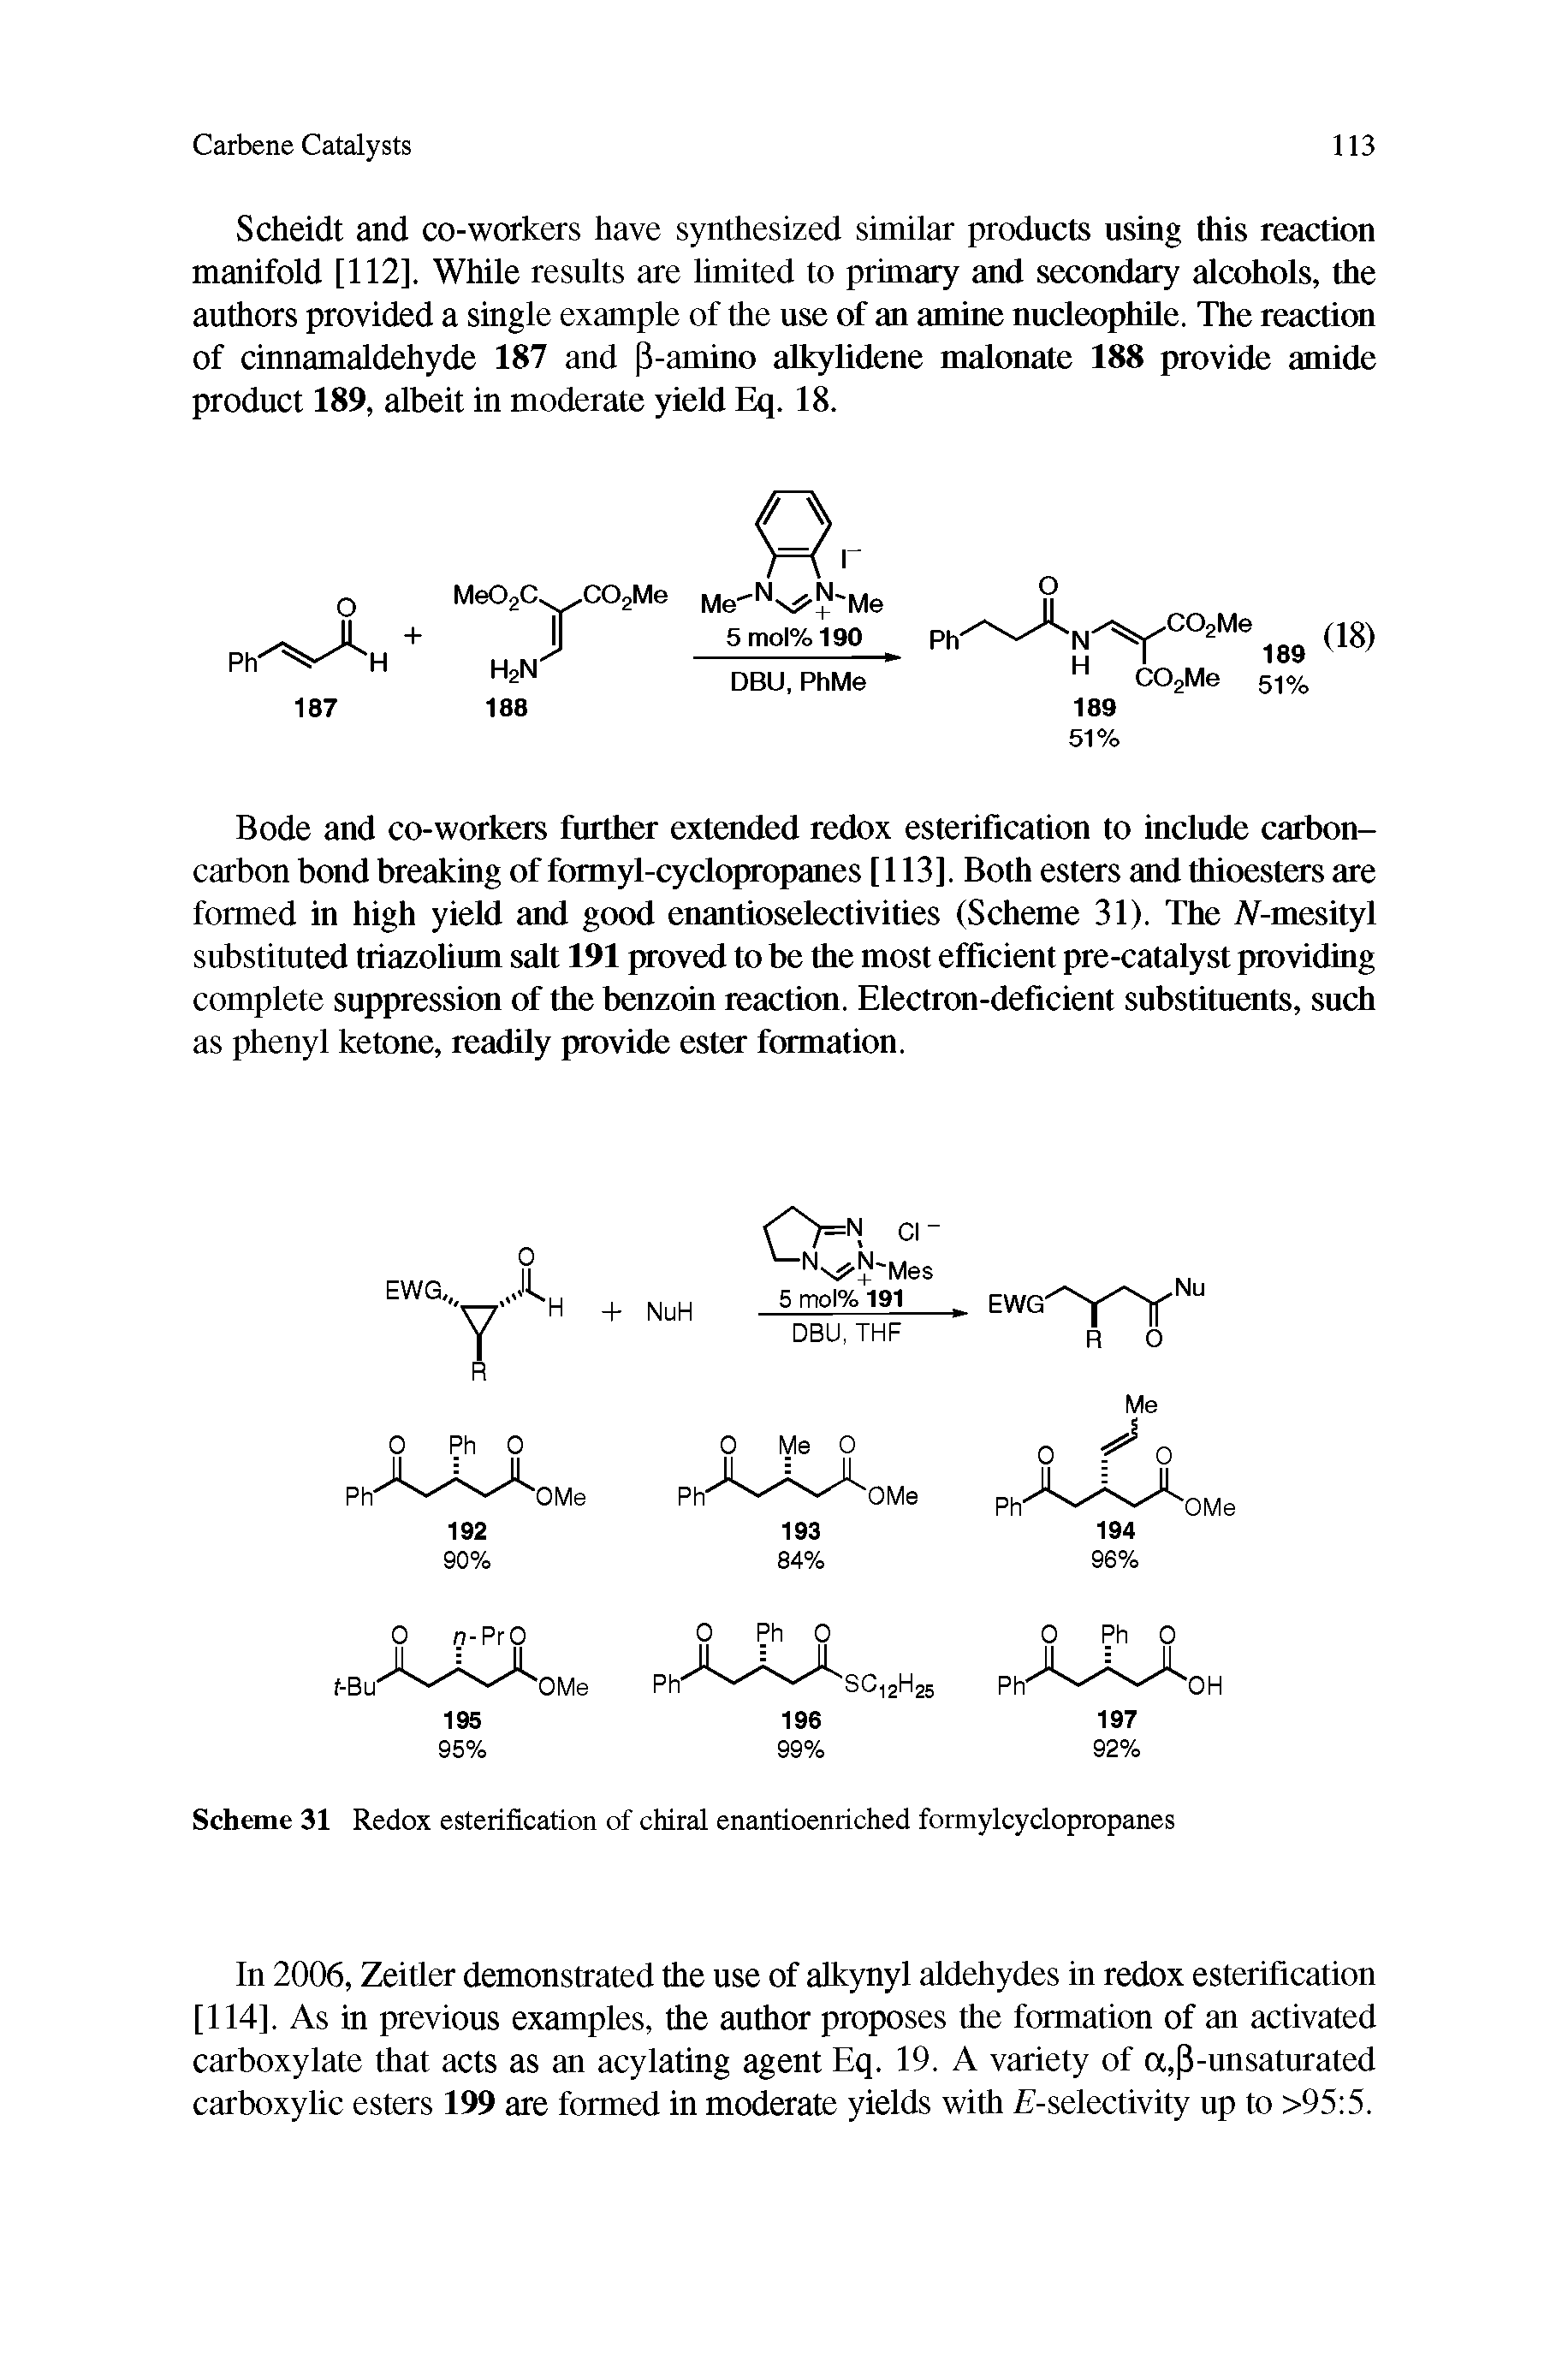 Scheme 31 Redox esterification of chiral enantioenriched formylcyclopropanes...